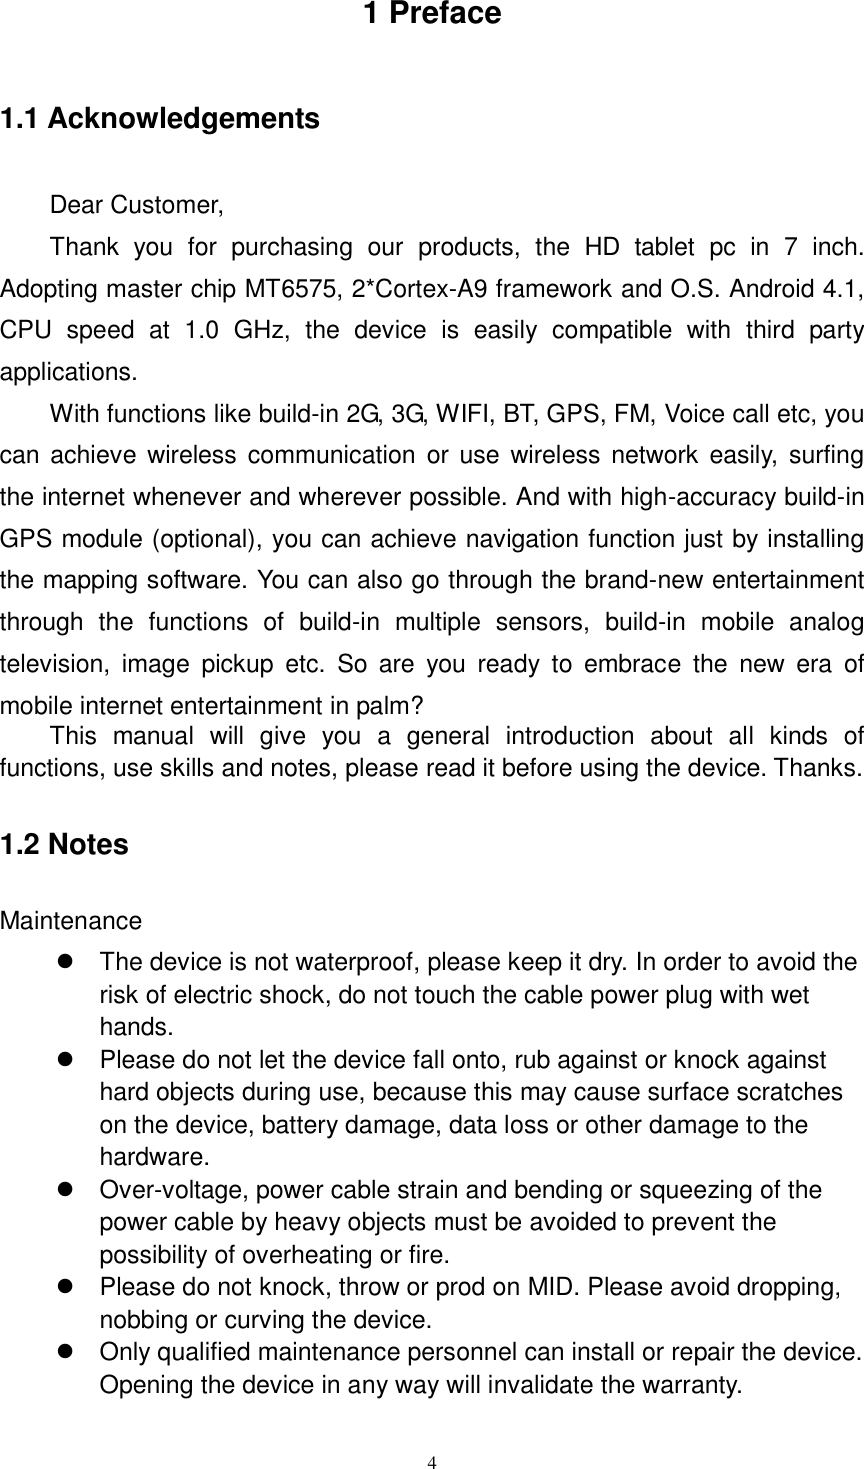      4 1 Preface 1.1 Acknowledgements Dear Customer,   Thank  you  for  purchasing  our  products,  the  HD  tablet  pc  in  7  inch. Adopting master chip MT6575, 2*Cortex-A9 framework and O.S. Android 4.1, CPU  speed  at  1.0  GHz,  the  device  is  easily  compatible  with  third  party applications. With functions like build-in 2G, 3G, WIFI, BT, GPS, FM, Voice call etc, you can achieve  wireless communication  or  use wireless network easily, surfing the internet whenever and wherever possible. And with high-accuracy build-in GPS module (optional), you can achieve navigation function just by installing the mapping software. You can also go through the brand-new entertainment through  the  functions  of  build-in  multiple  sensors,  build-in  mobile  analog television,  image  pickup  etc.  So  are  you  ready  to  embrace  the  new  era  of mobile internet entertainment in palm? This  manual  will  give  you  a  general  introduction  about  all  kinds  of functions, use skills and notes, please read it before using the device. Thanks. 1.2 Notes   Maintenance   The device is not waterproof, please keep it dry. In order to avoid the risk of electric shock, do not touch the cable power plug with wet hands.   Please do not let the device fall onto, rub against or knock against hard objects during use, because this may cause surface scratches on the device, battery damage, data loss or other damage to the hardware.   Over-voltage, power cable strain and bending or squeezing of the power cable by heavy objects must be avoided to prevent the possibility of overheating or fire.   Please do not knock, throw or prod on MID. Please avoid dropping, nobbing or curving the device.         Only qualified maintenance personnel can install or repair the device. Opening the device in any way will invalidate the warranty. 